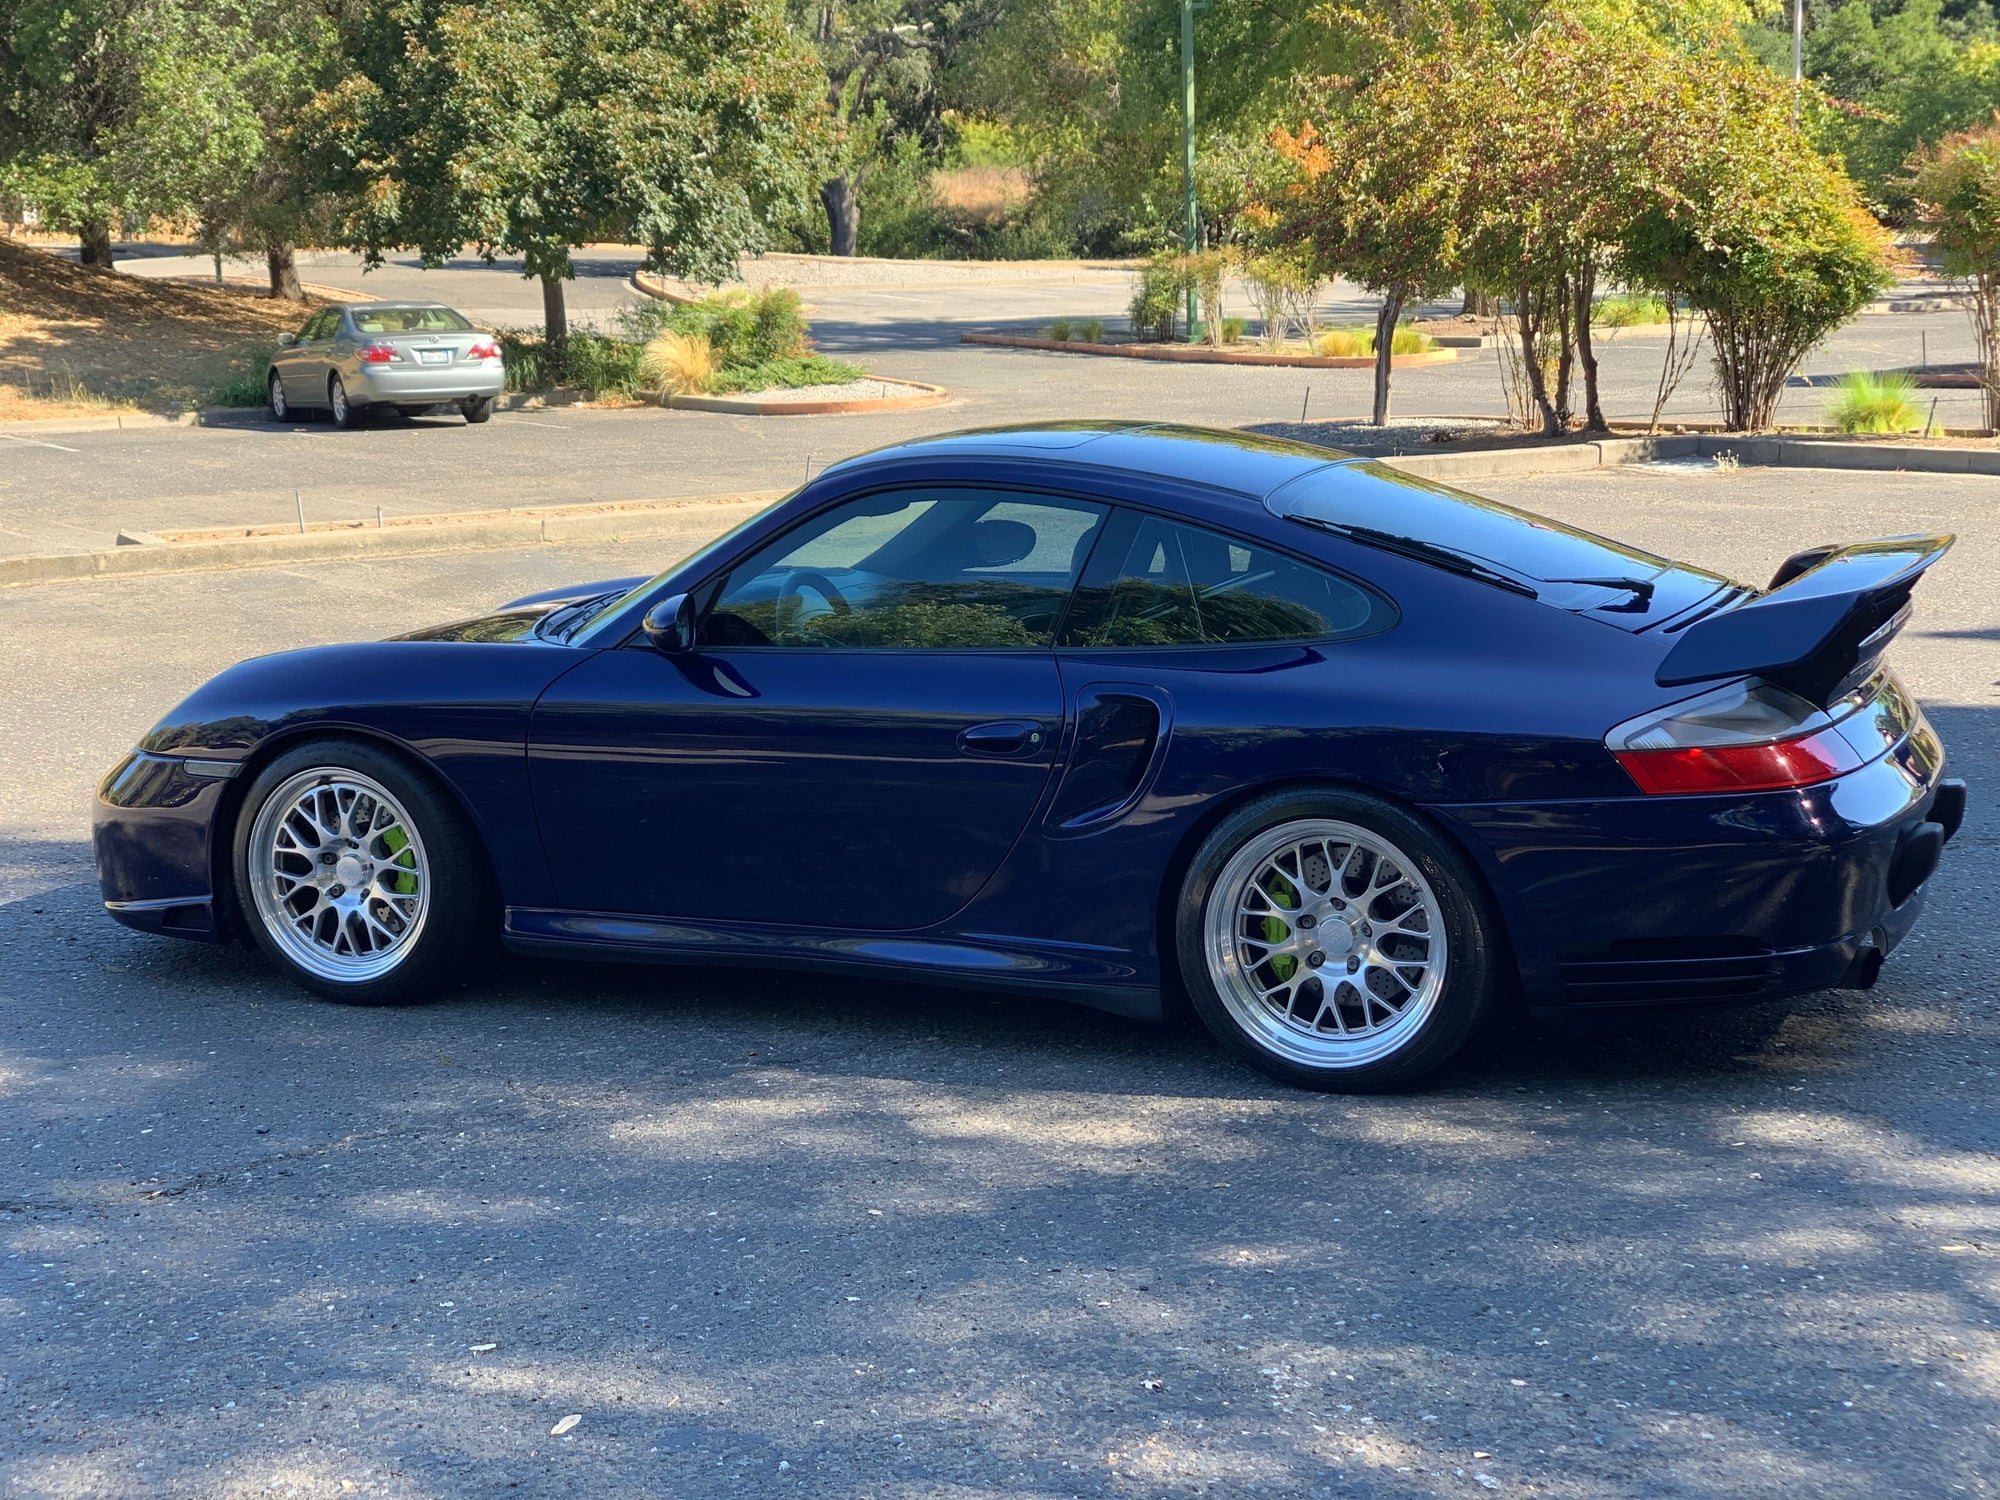 2002 Porsche 911 - 2002 Porsche 911 996 Turbo Lapis Blue - Used - VIN WP0AB29932S685887 - 6 cyl - AWD - Manual - Coupe - Blue - Marin County, CA 94949, United States